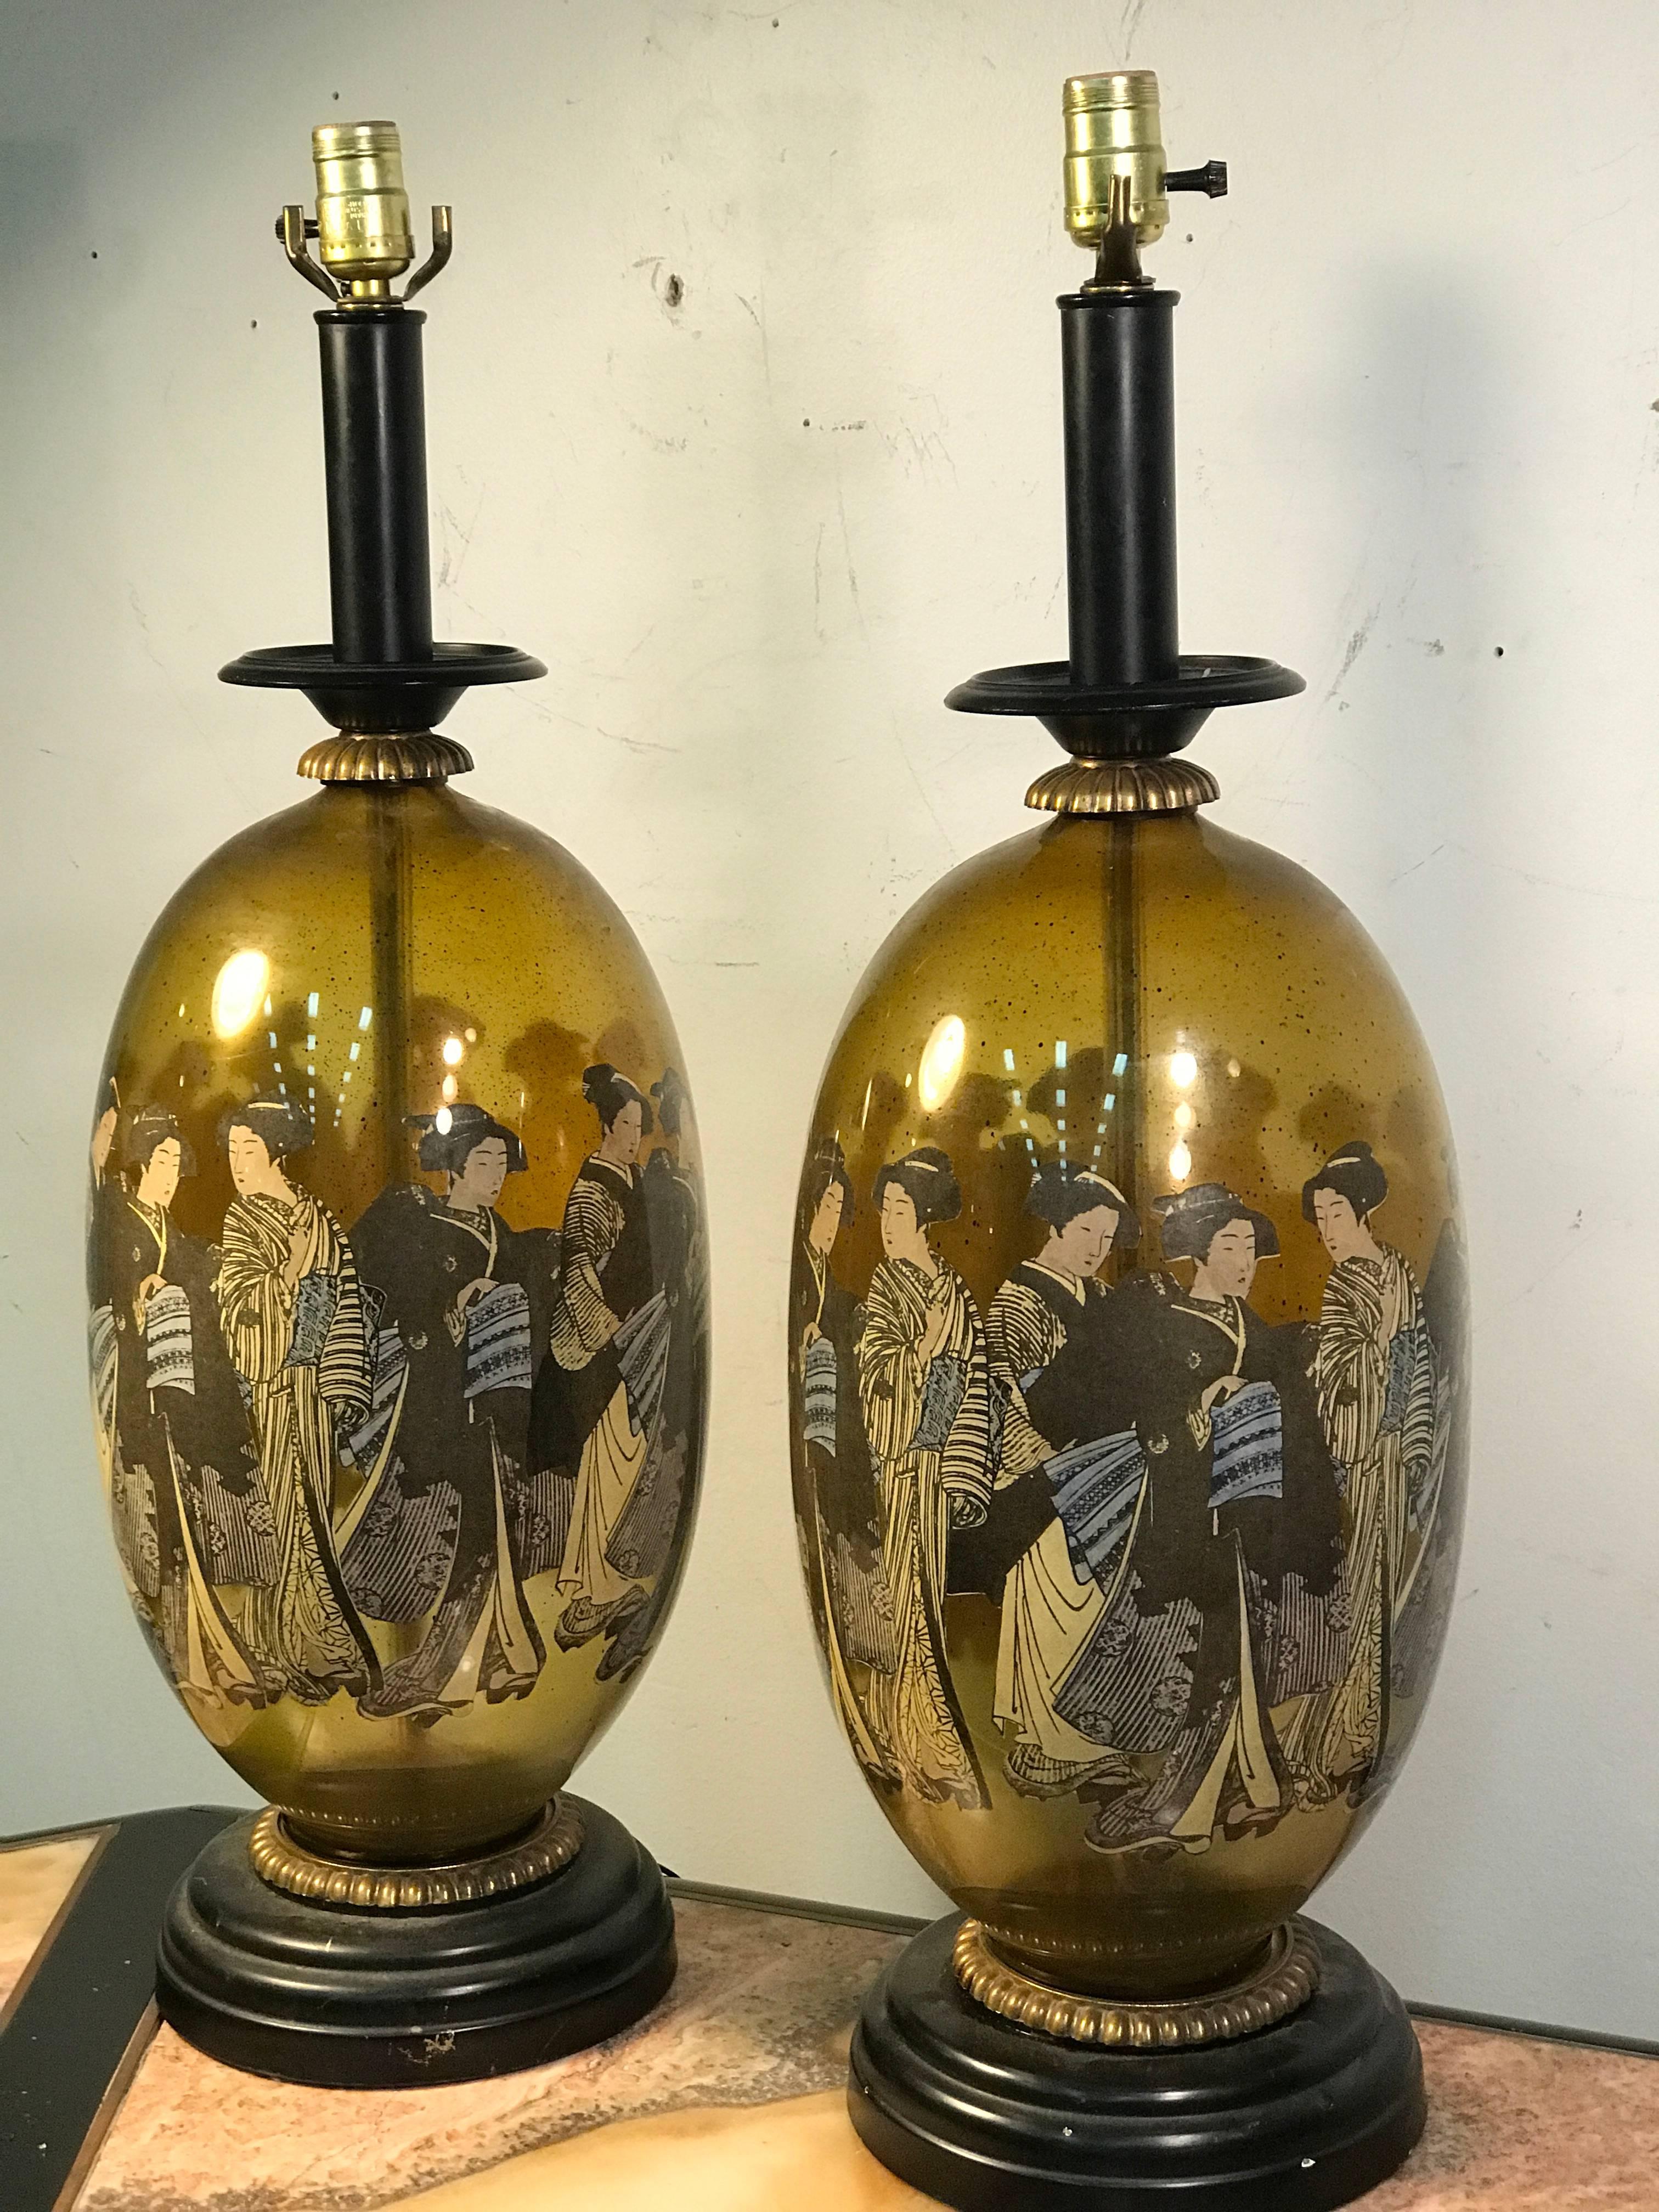 A beautiful pair of Asian inspired hand-painted table lamps in the manner of James Mont, circa 1970. Good vintage condition with some wear appropriate with age.